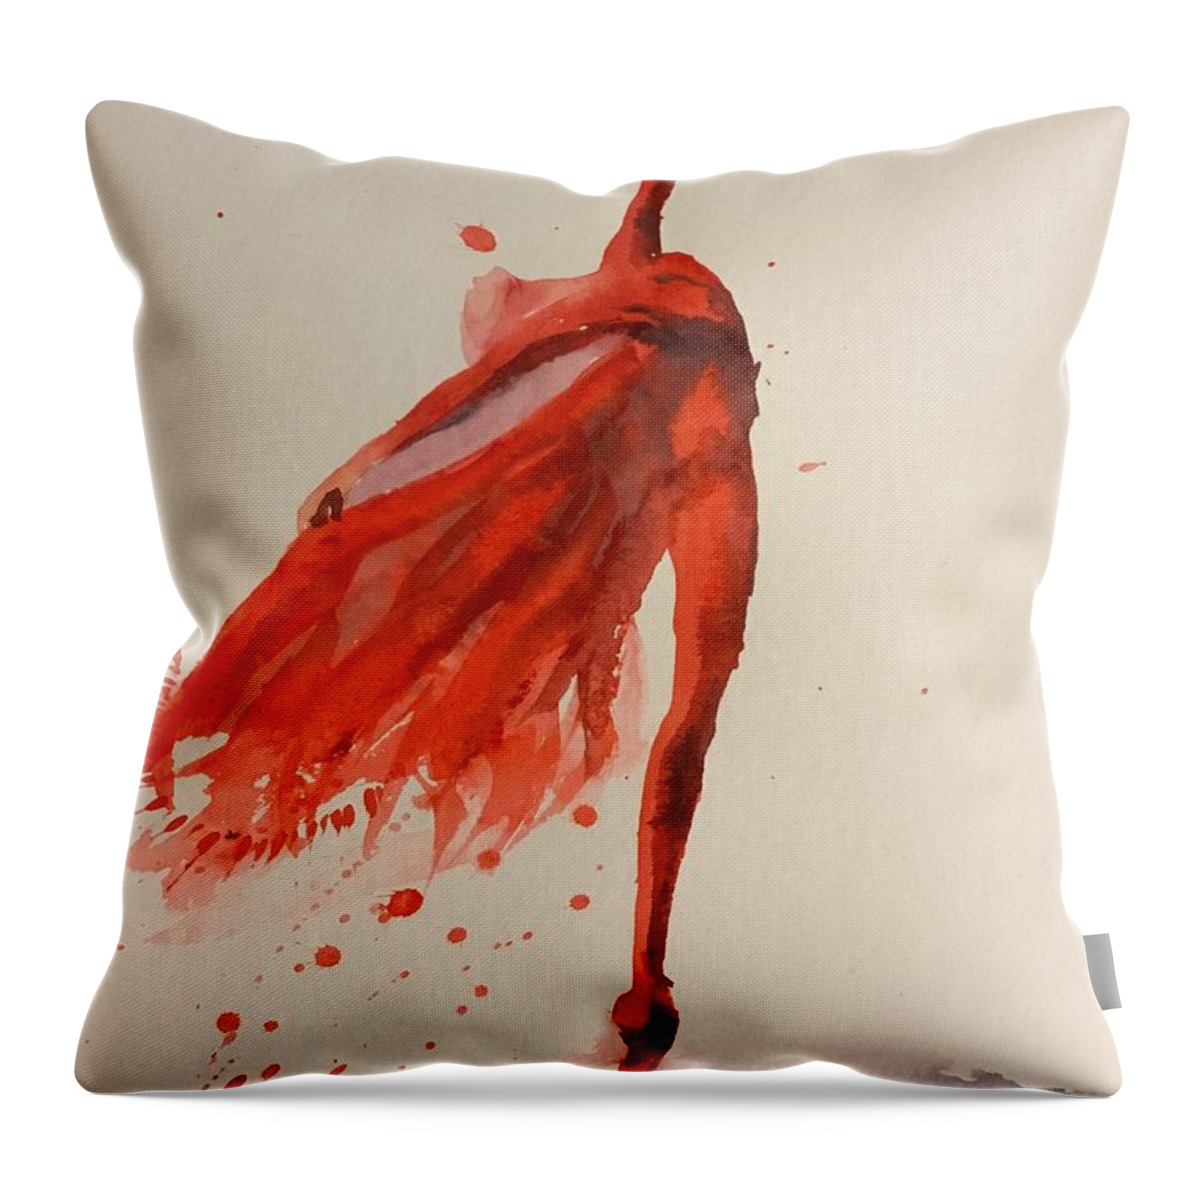 1372019 Throw Pillow featuring the painting 1372019 by Han in Huang wong